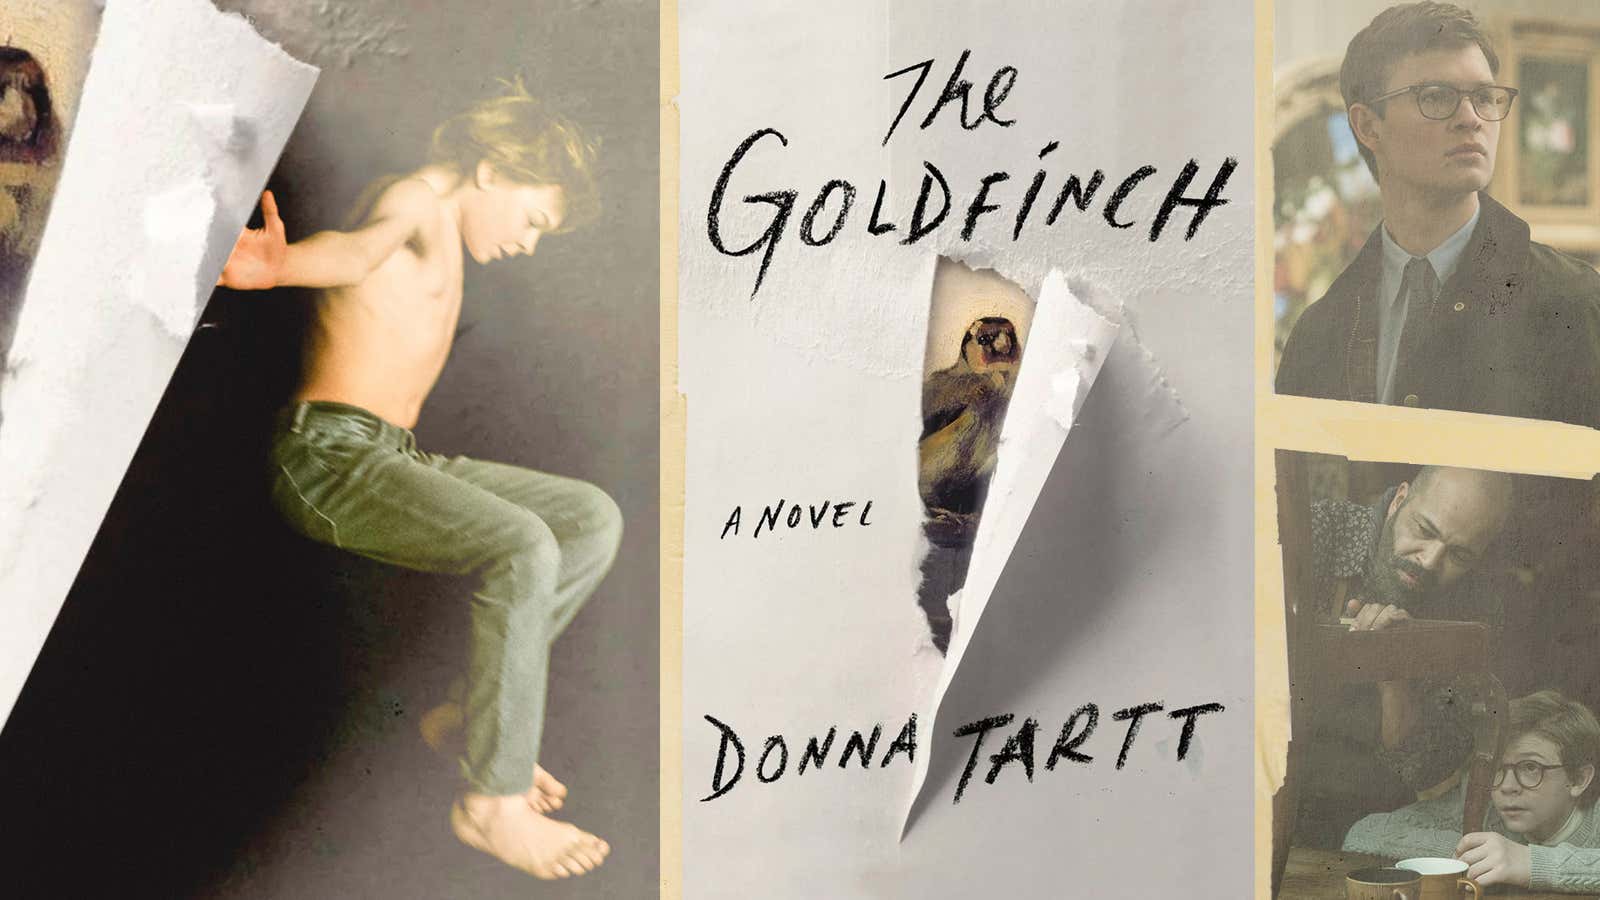 As a movie, The Goldfinch is just a series of unfortunate events